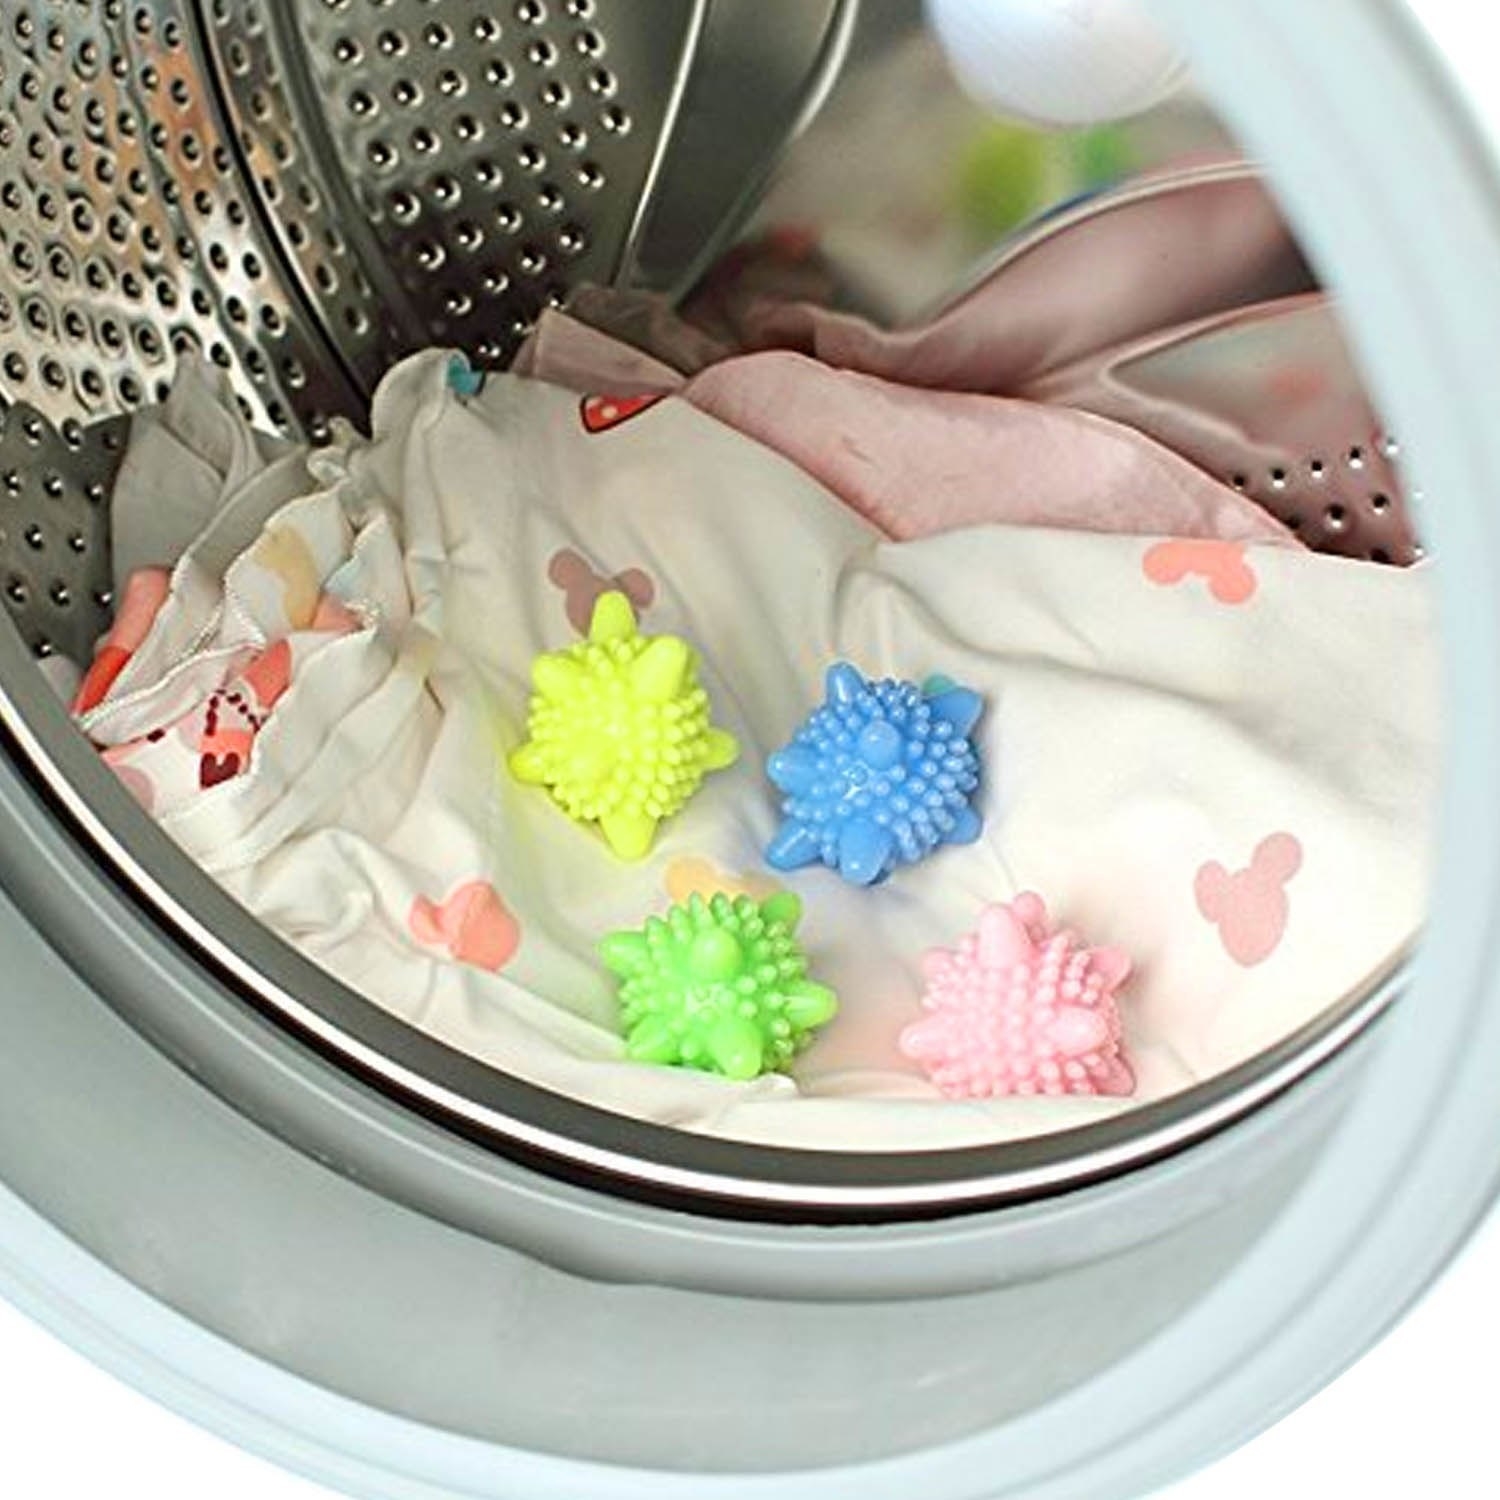 11 Cheap(ish) Laundry Aids to Help Your Clothes Look Better